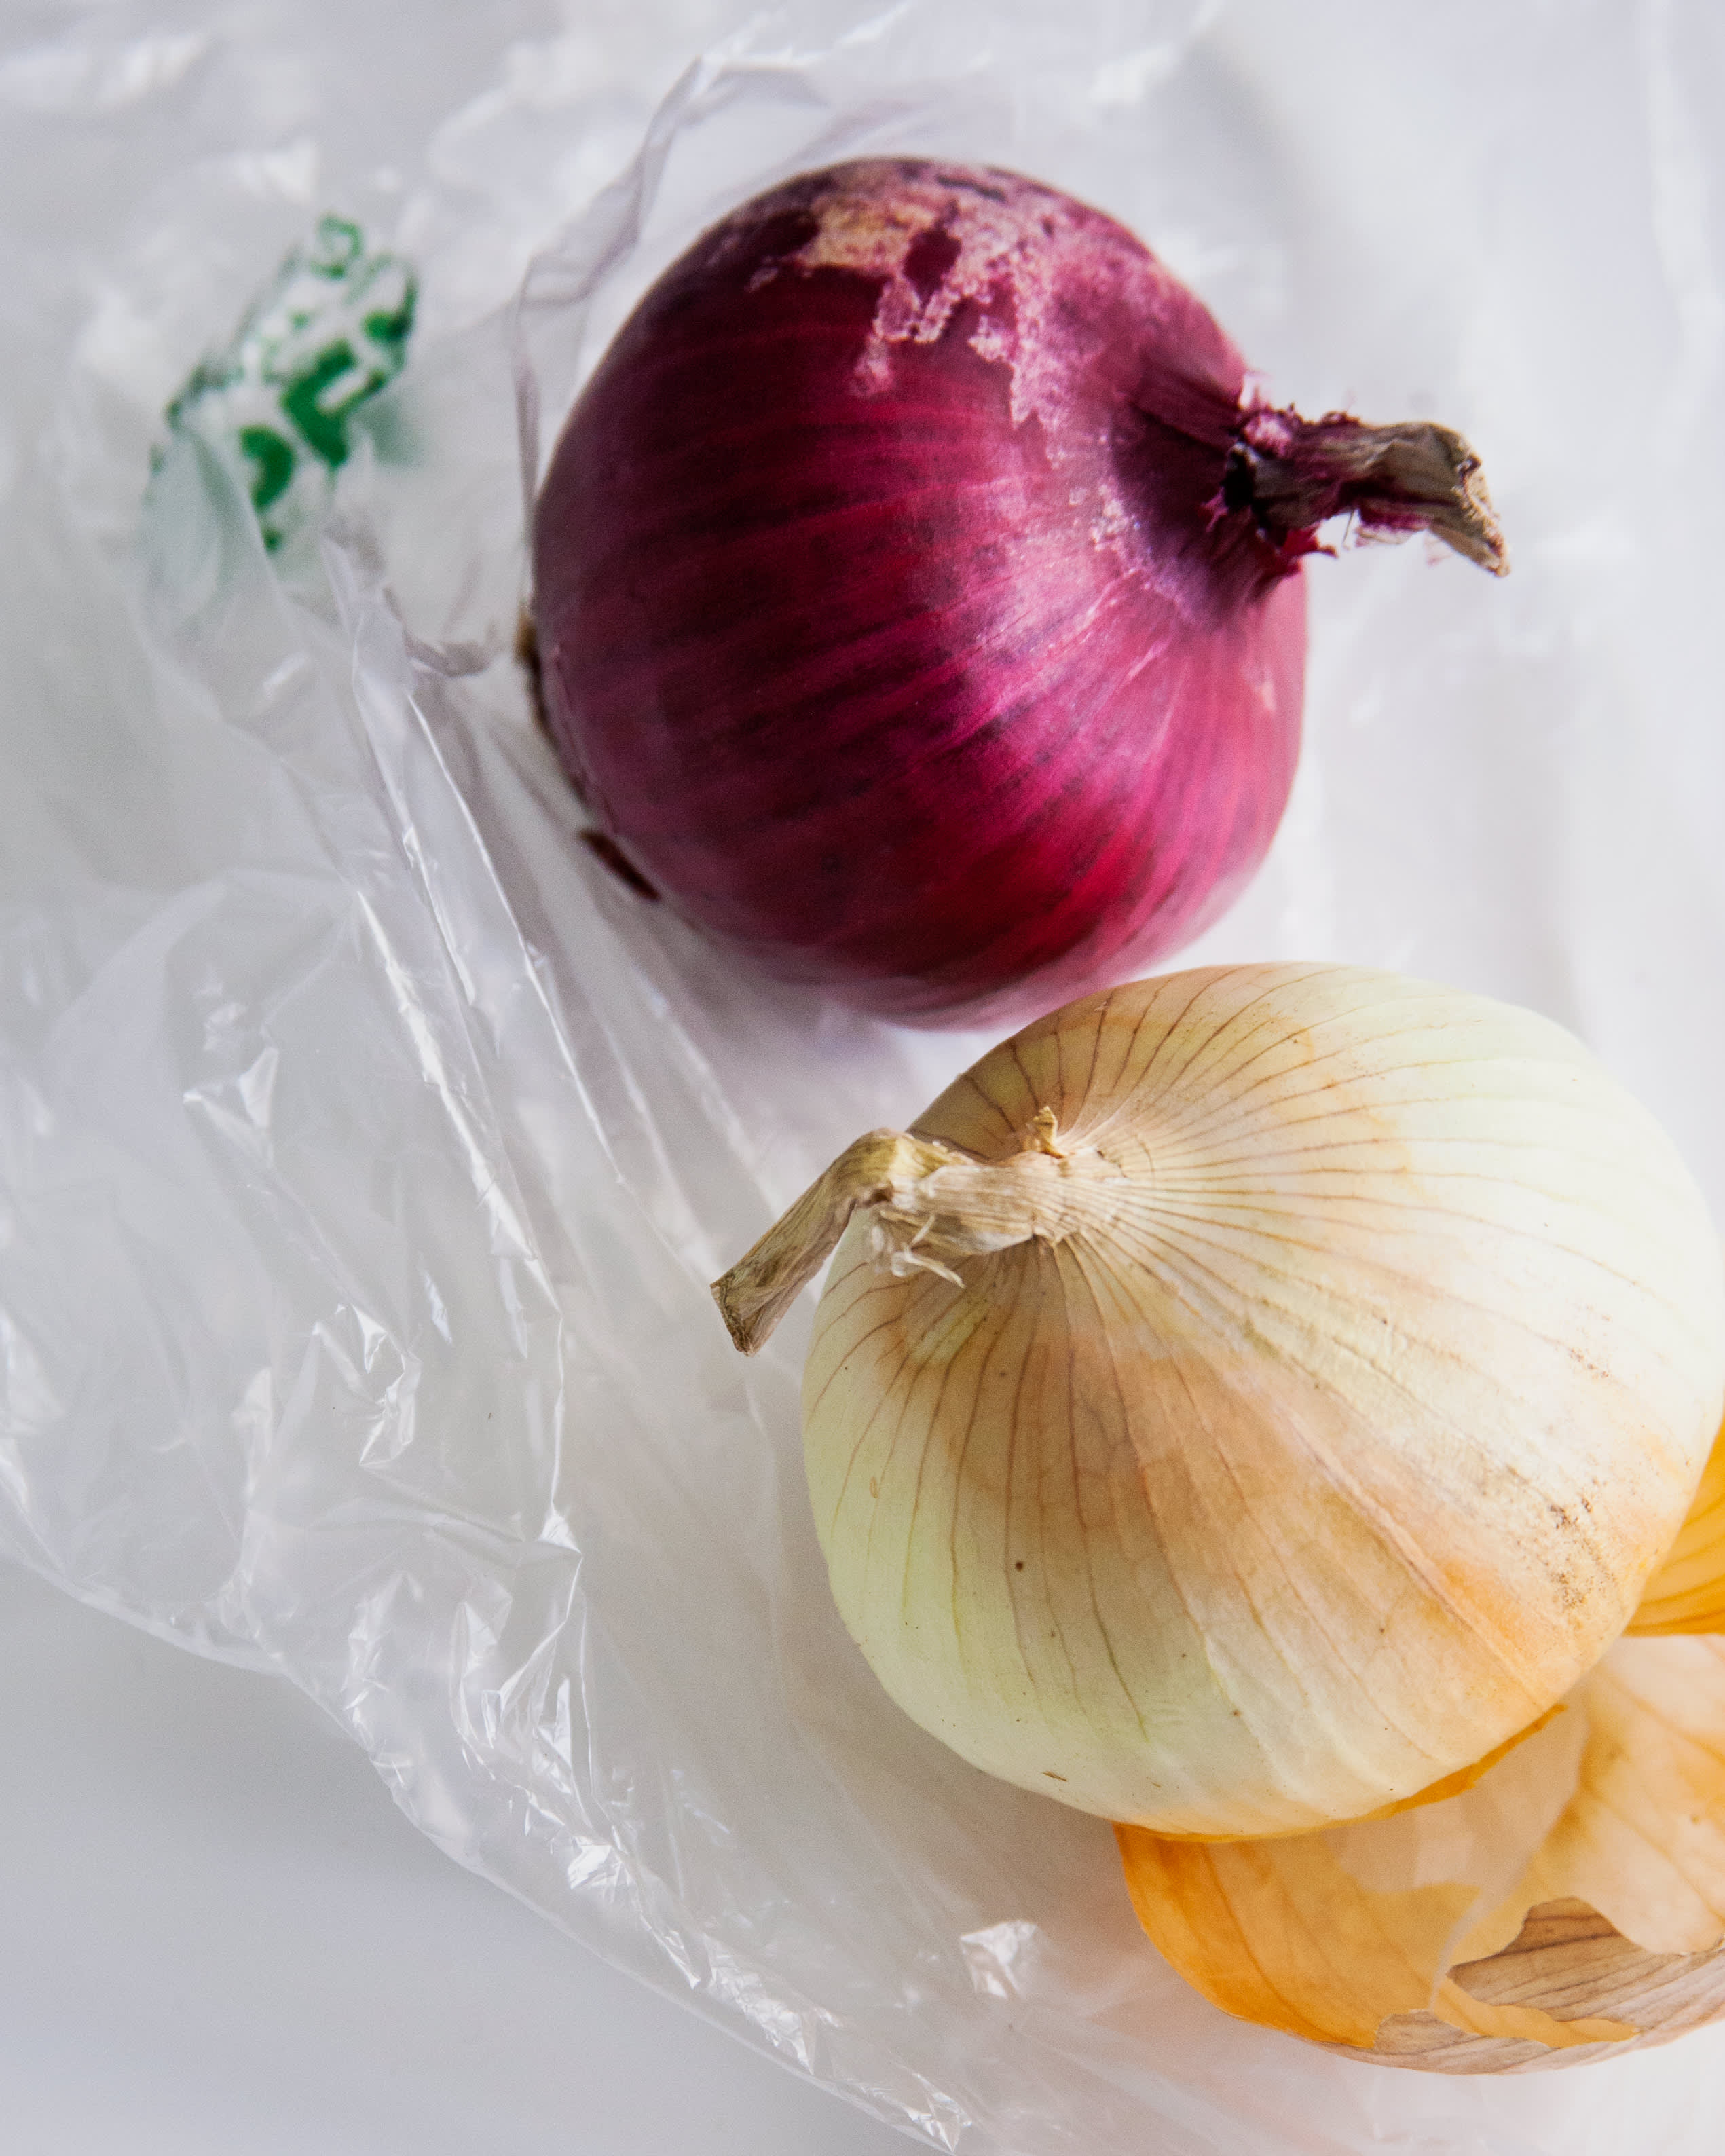 Pronged Onion Holder Helps Slice Onions Quickly and Easily